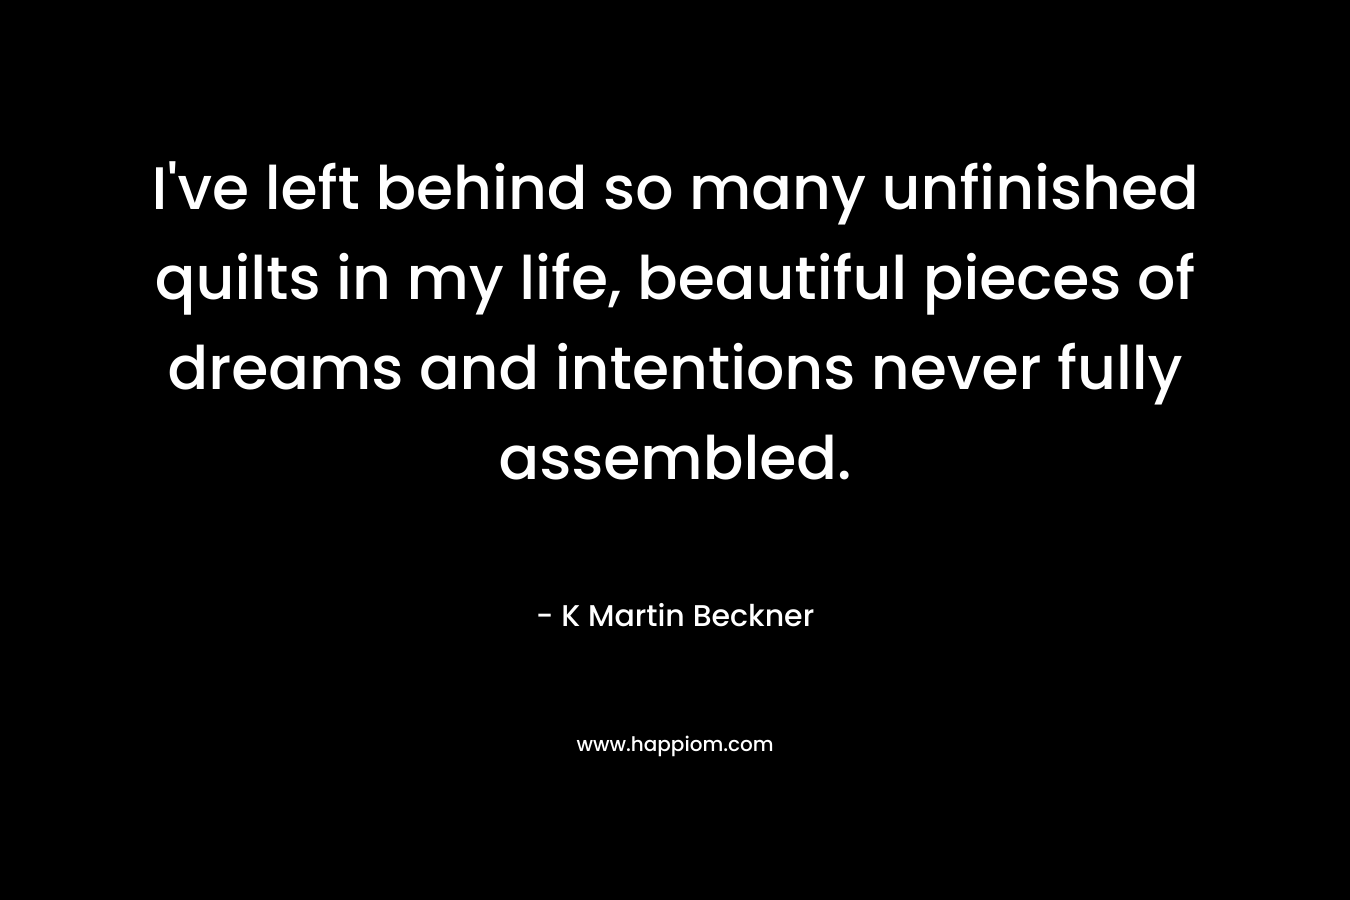 I’ve left behind so many unfinished quilts in my life, beautiful pieces of dreams and intentions never fully assembled. – K Martin Beckner